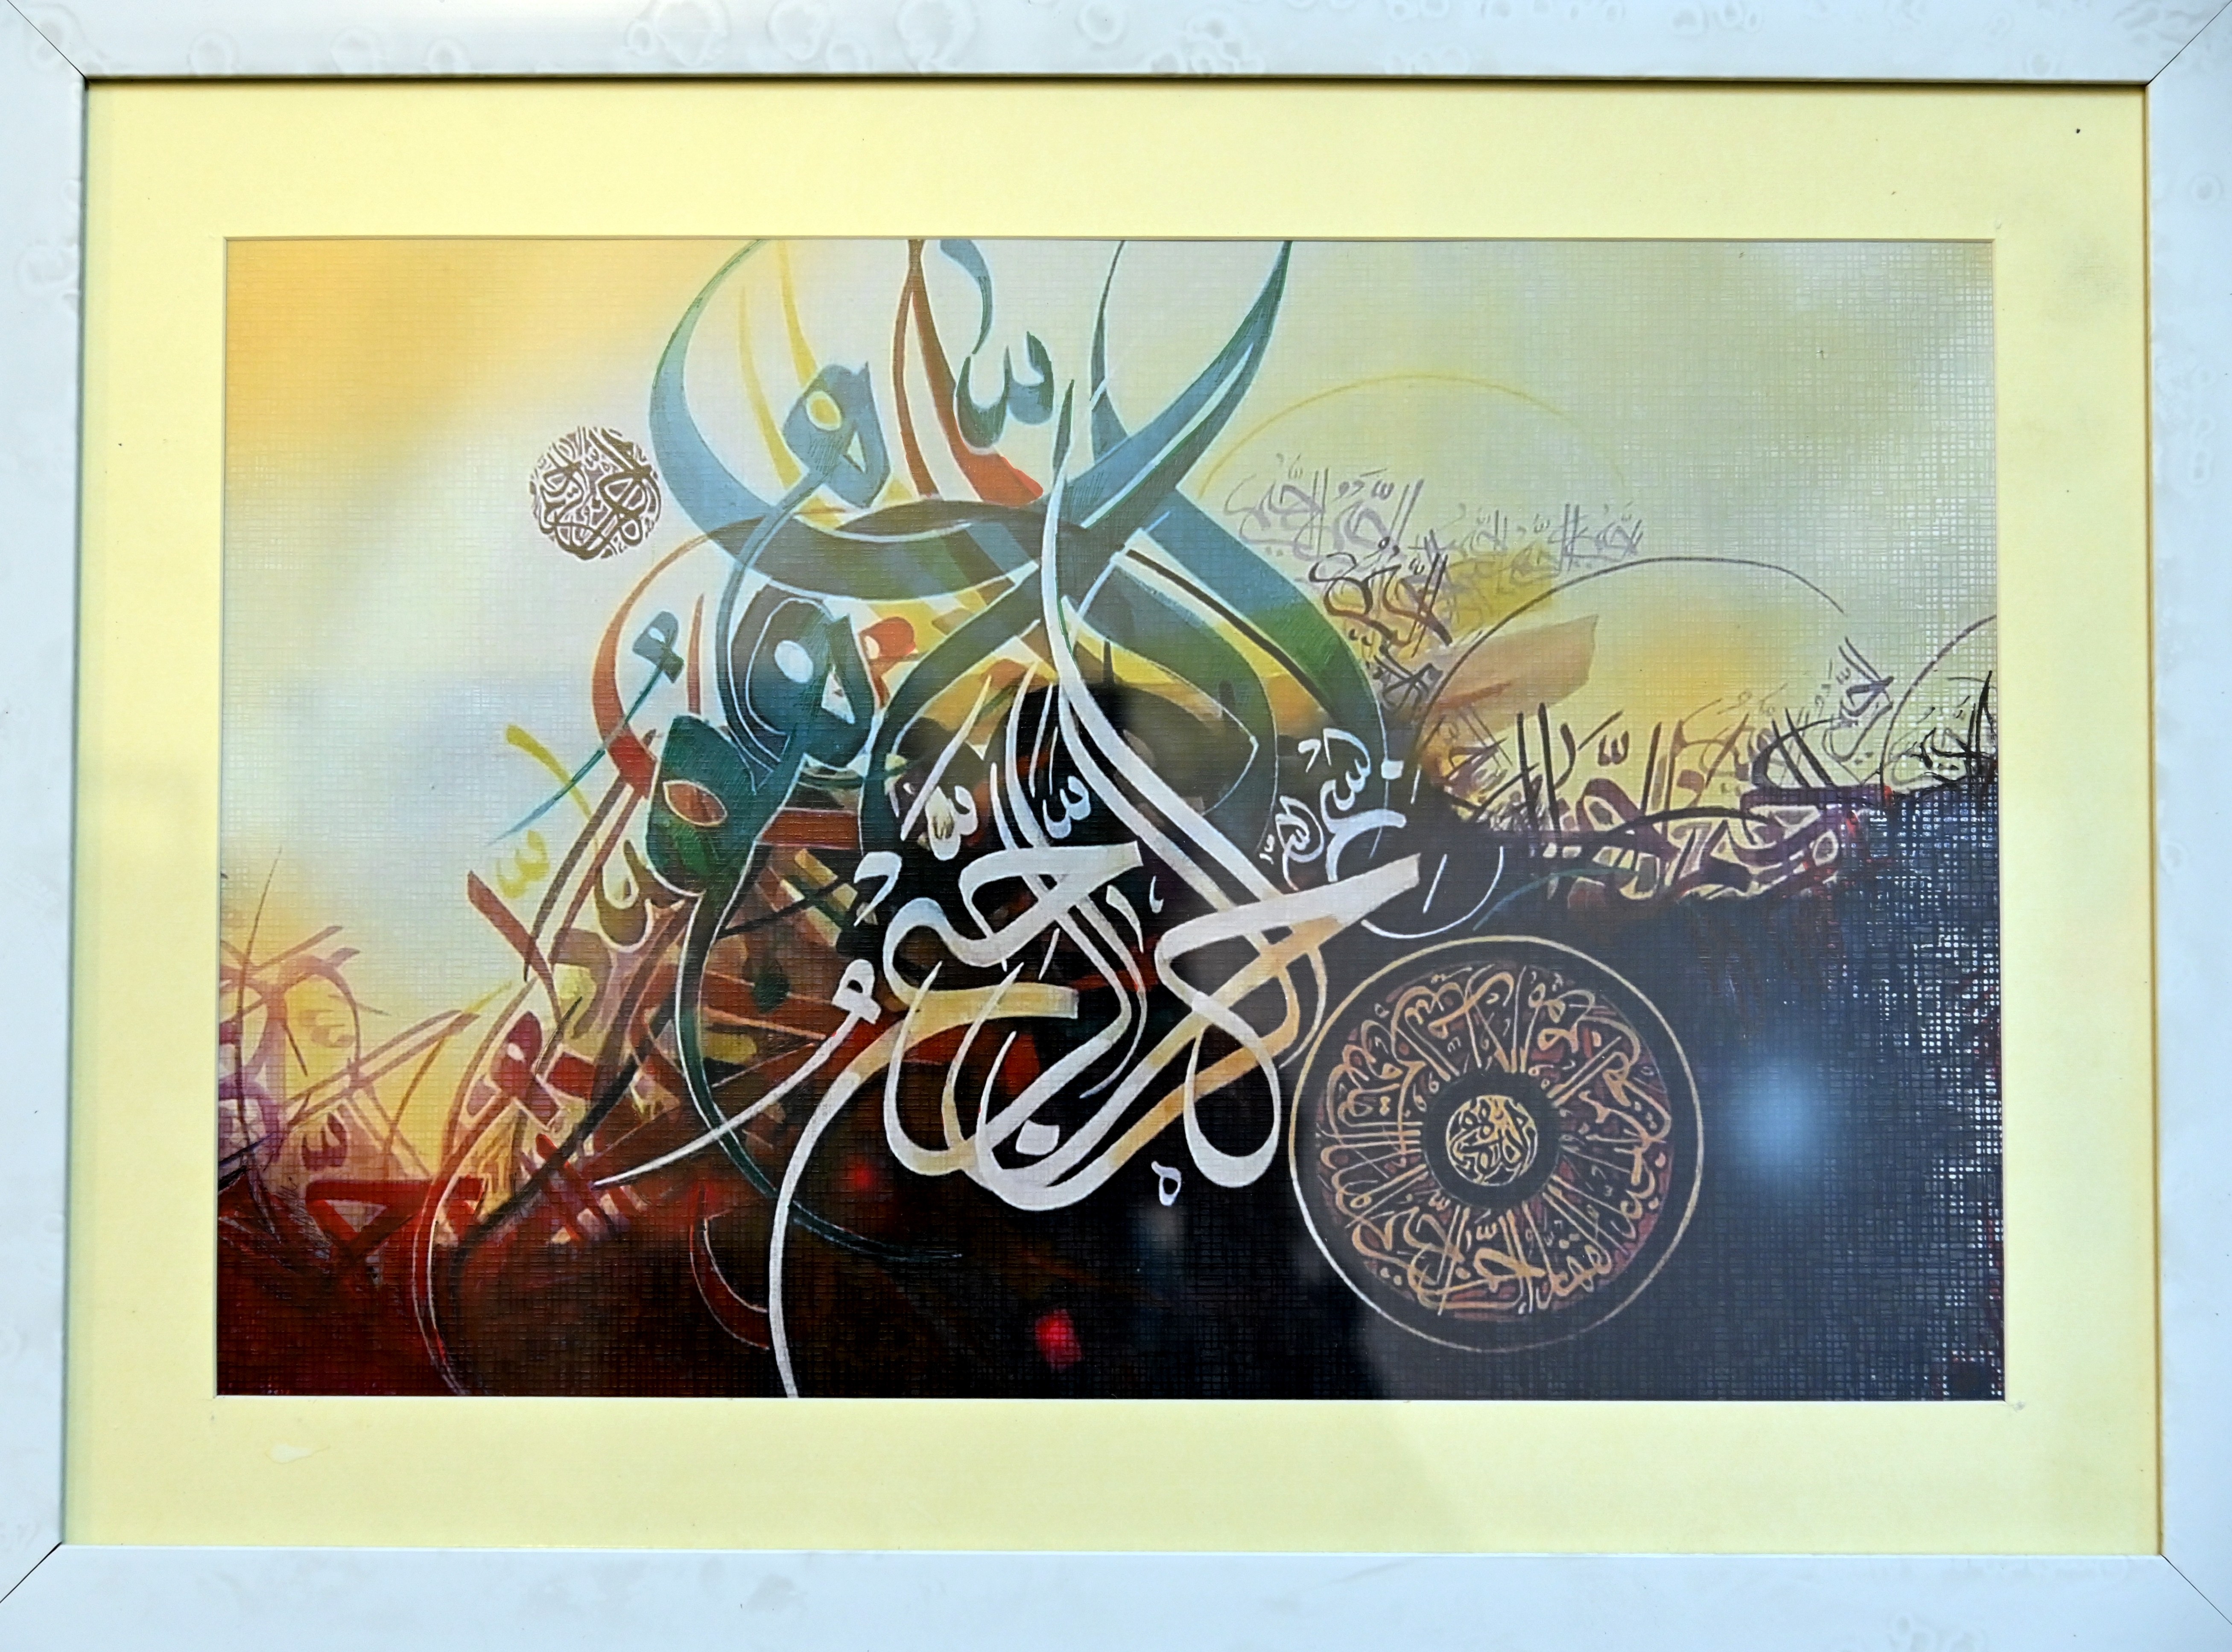 The beautiful painting of Arabic calligraphy